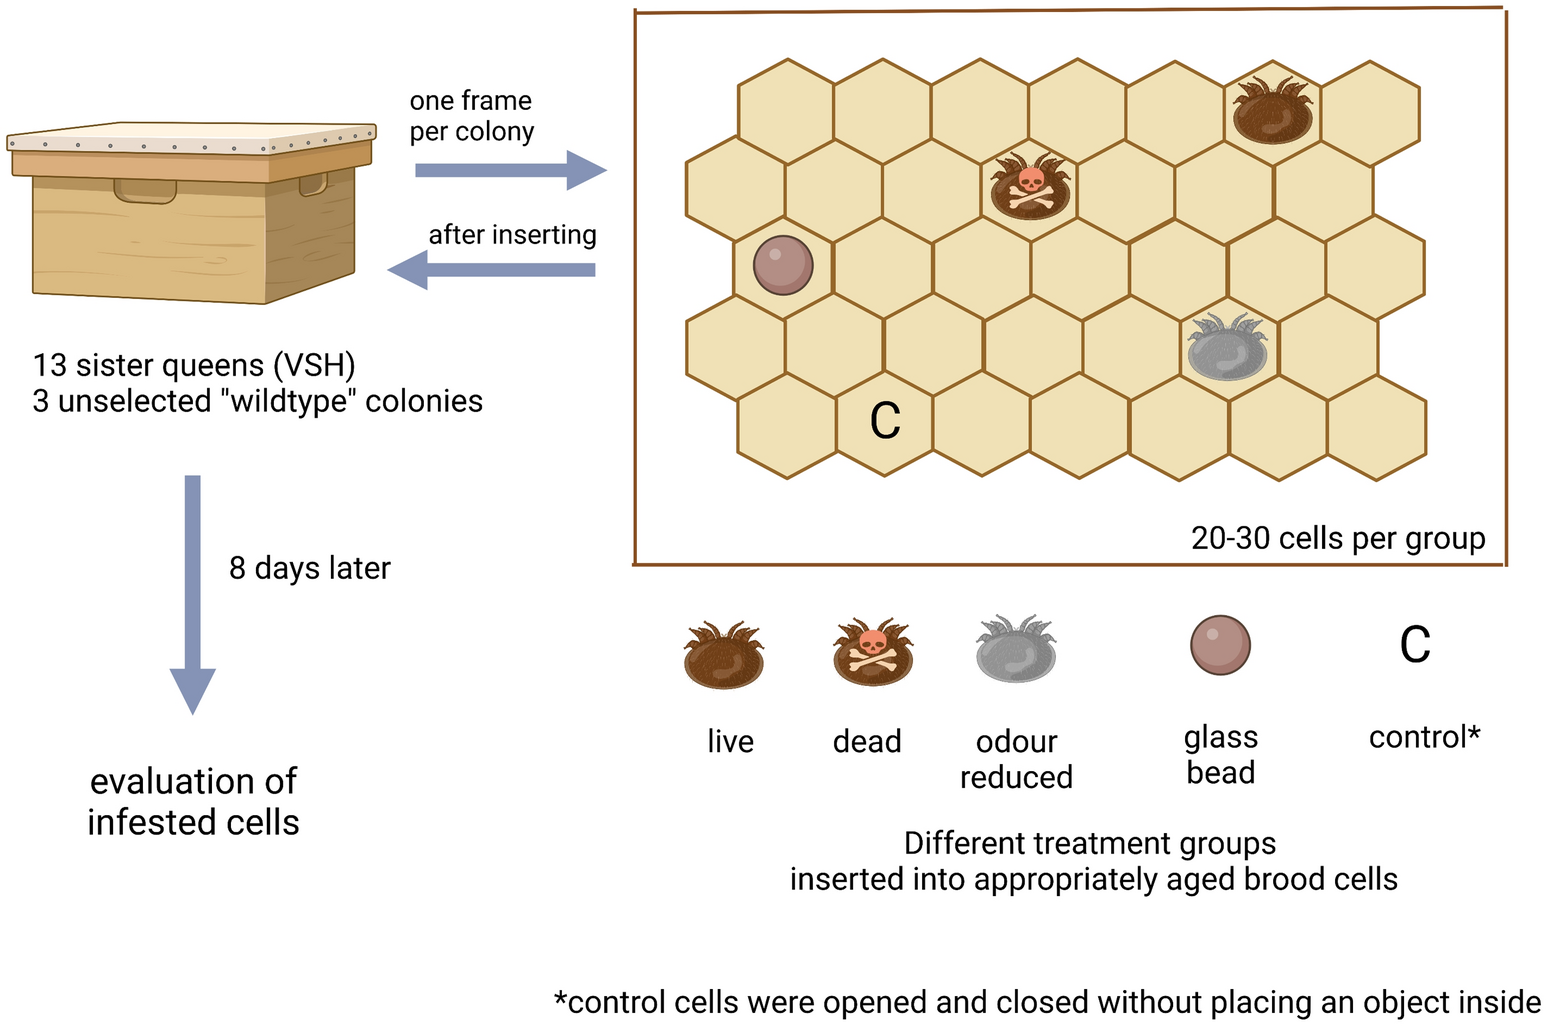 Honey bees (Apis mellifera) preselected for Varroa sensitive hygiene  discriminate between live and dead Varroa destructor and inanimate objects